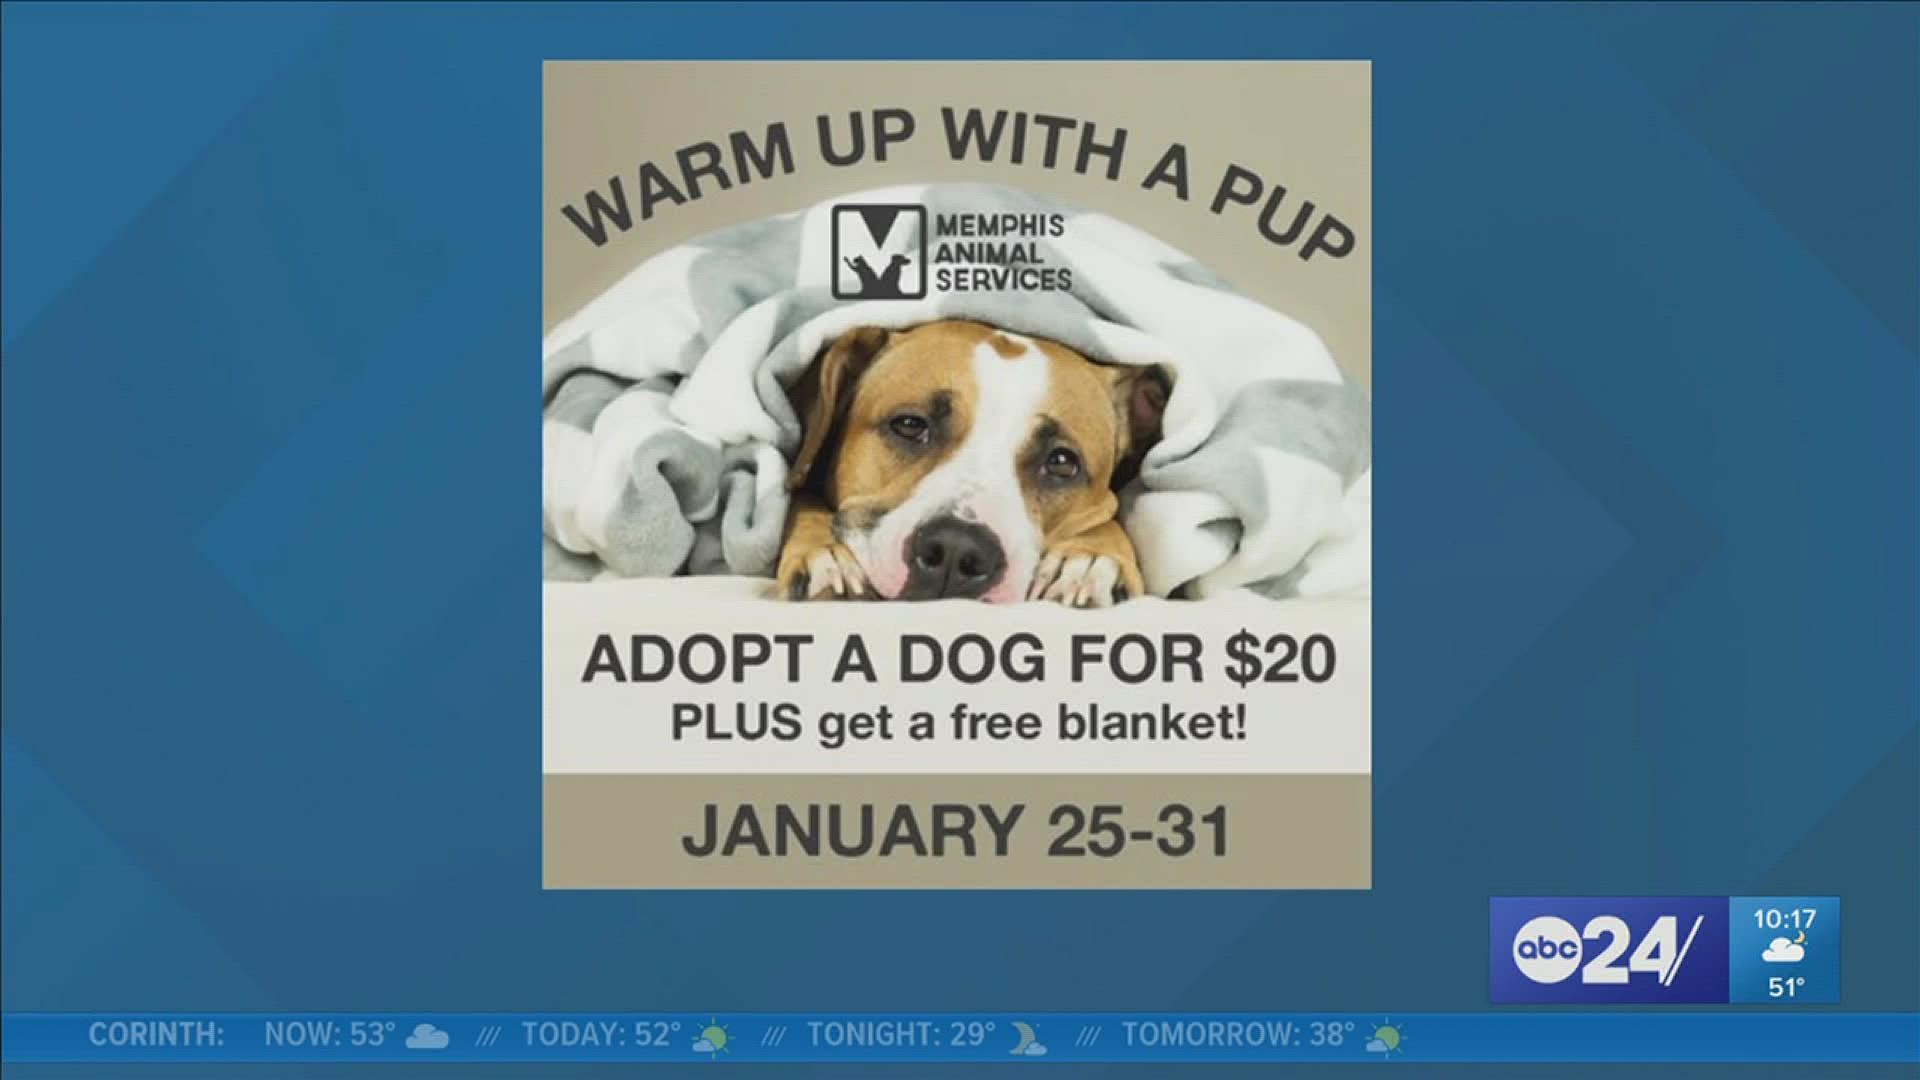 For just $20, you can get a dog and blanket in Memphis 